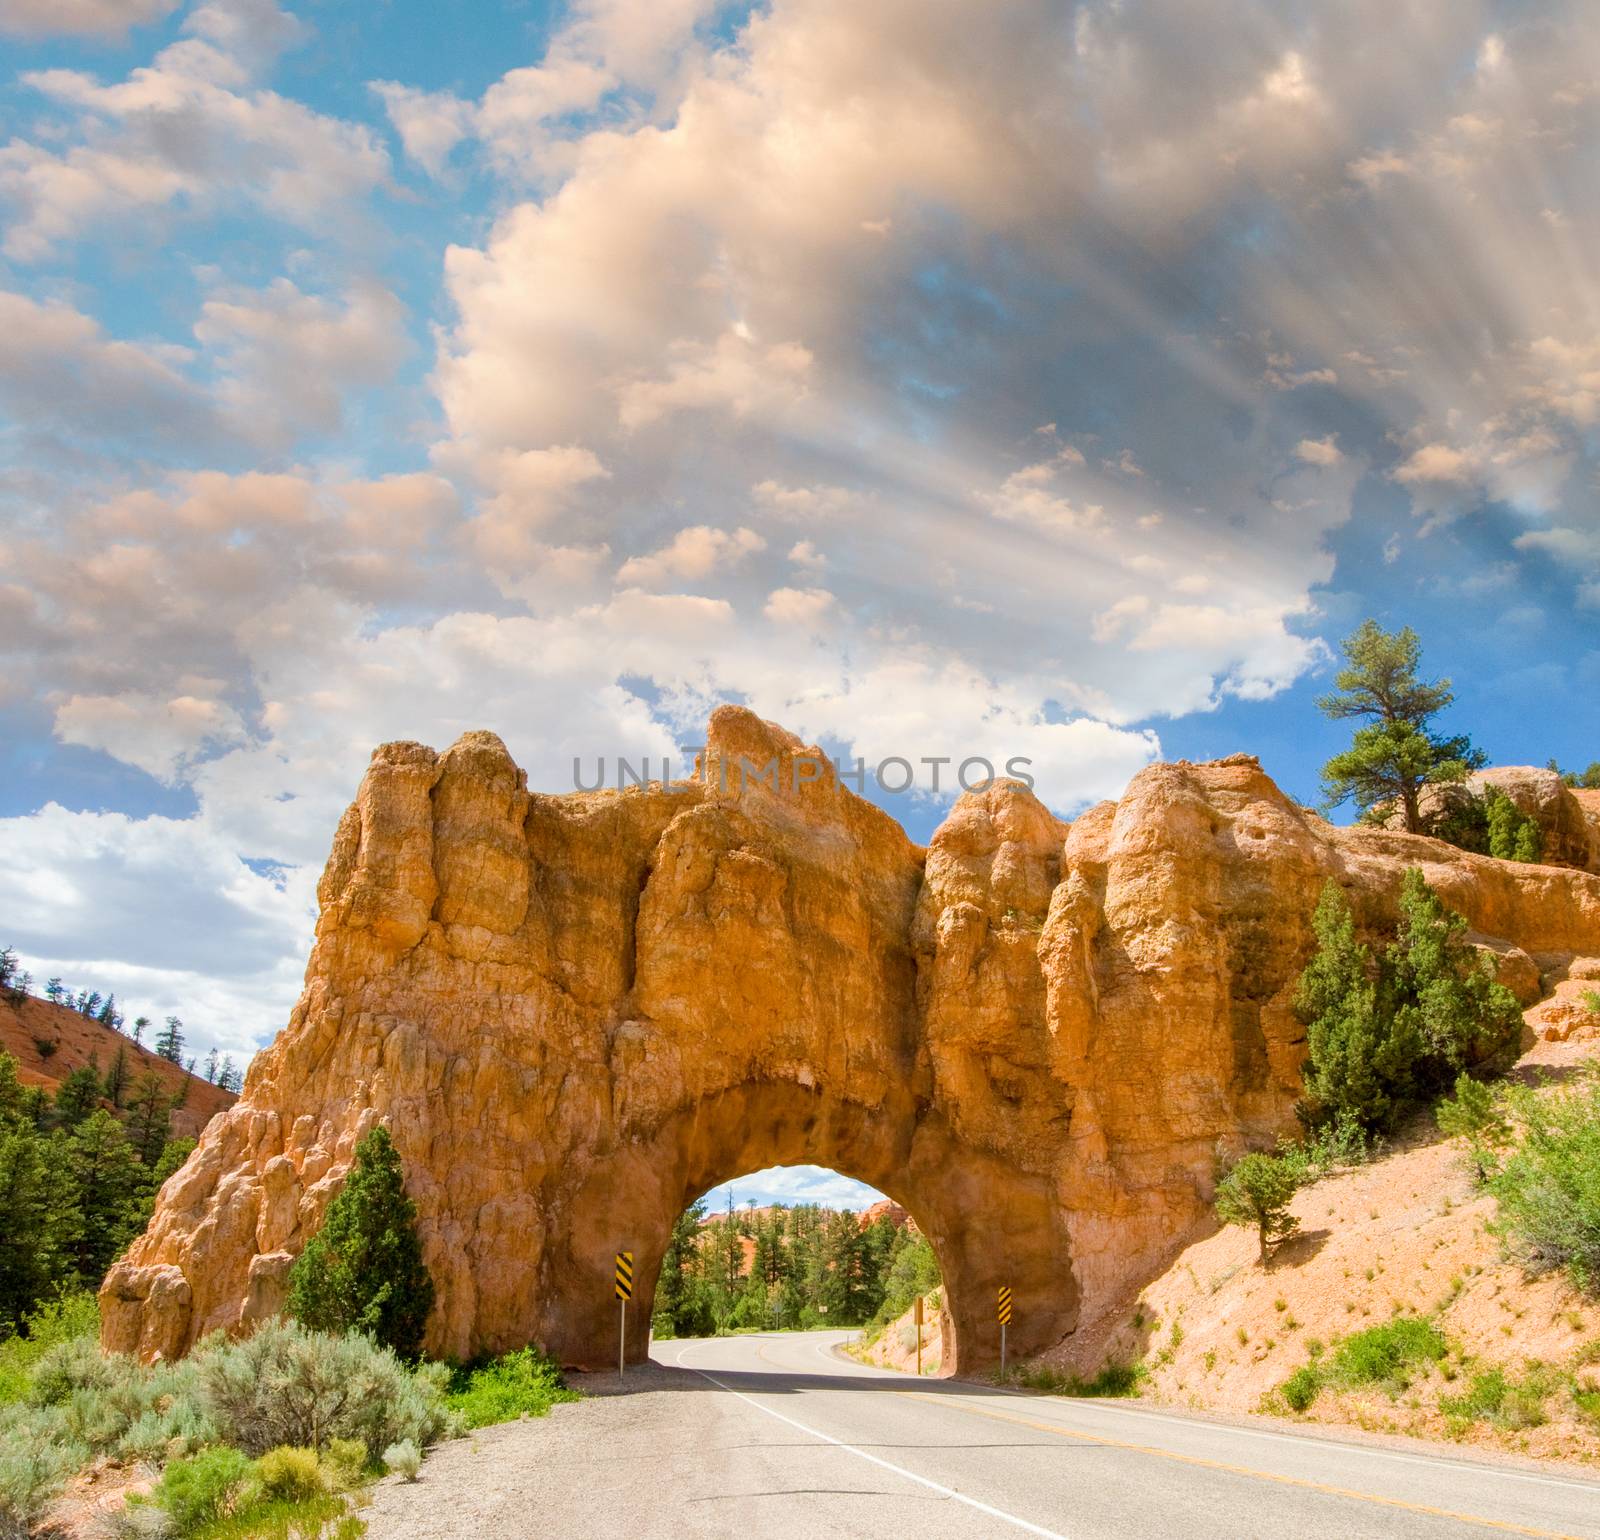 Arches National Park, USA - Entrance Road by jovannig